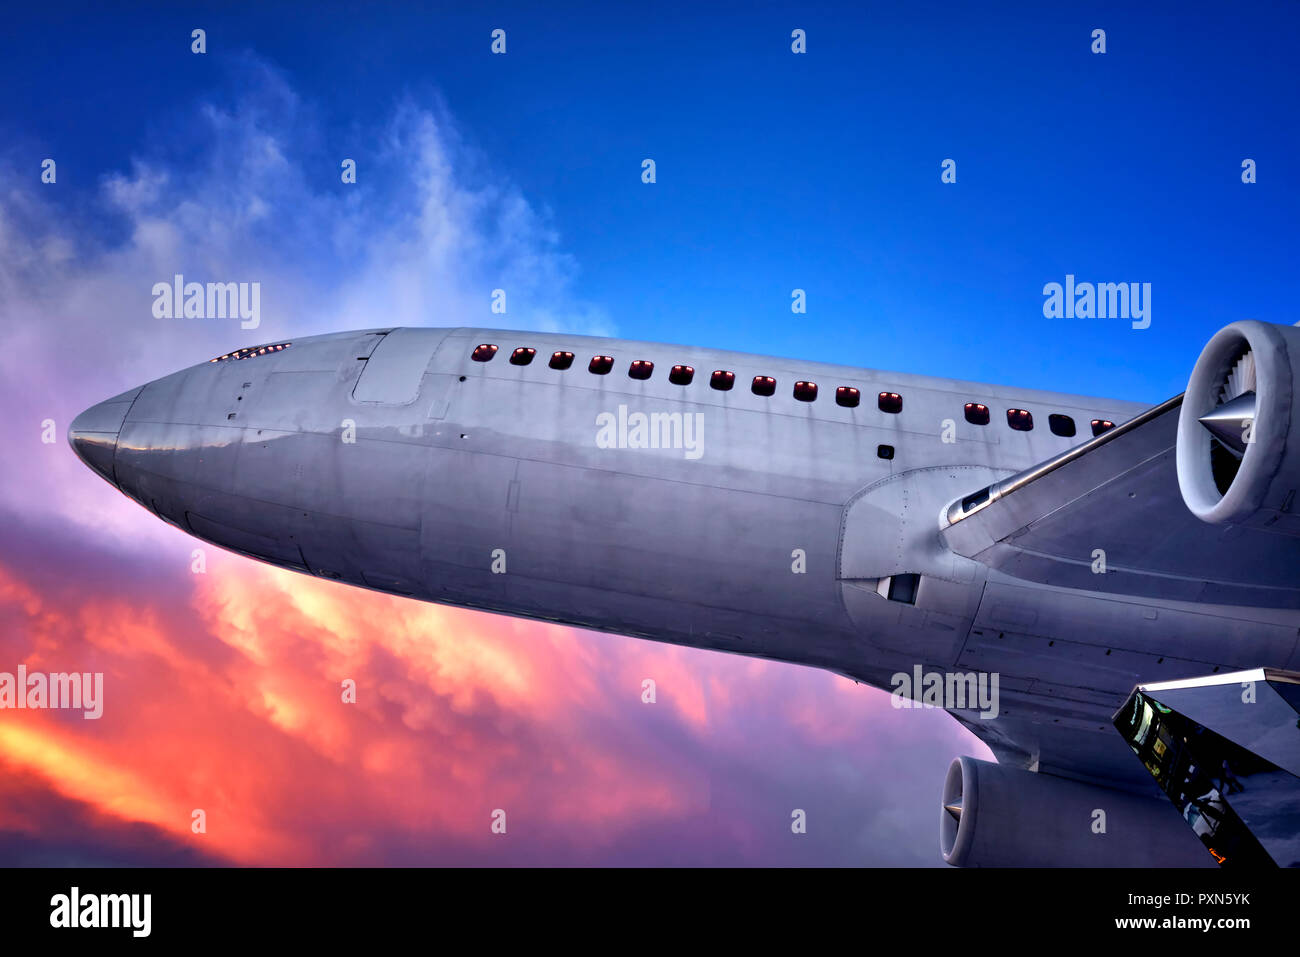 Airplane. Ground based aircraft against a dramatic sky. Jumbo airliner. Stock Photo